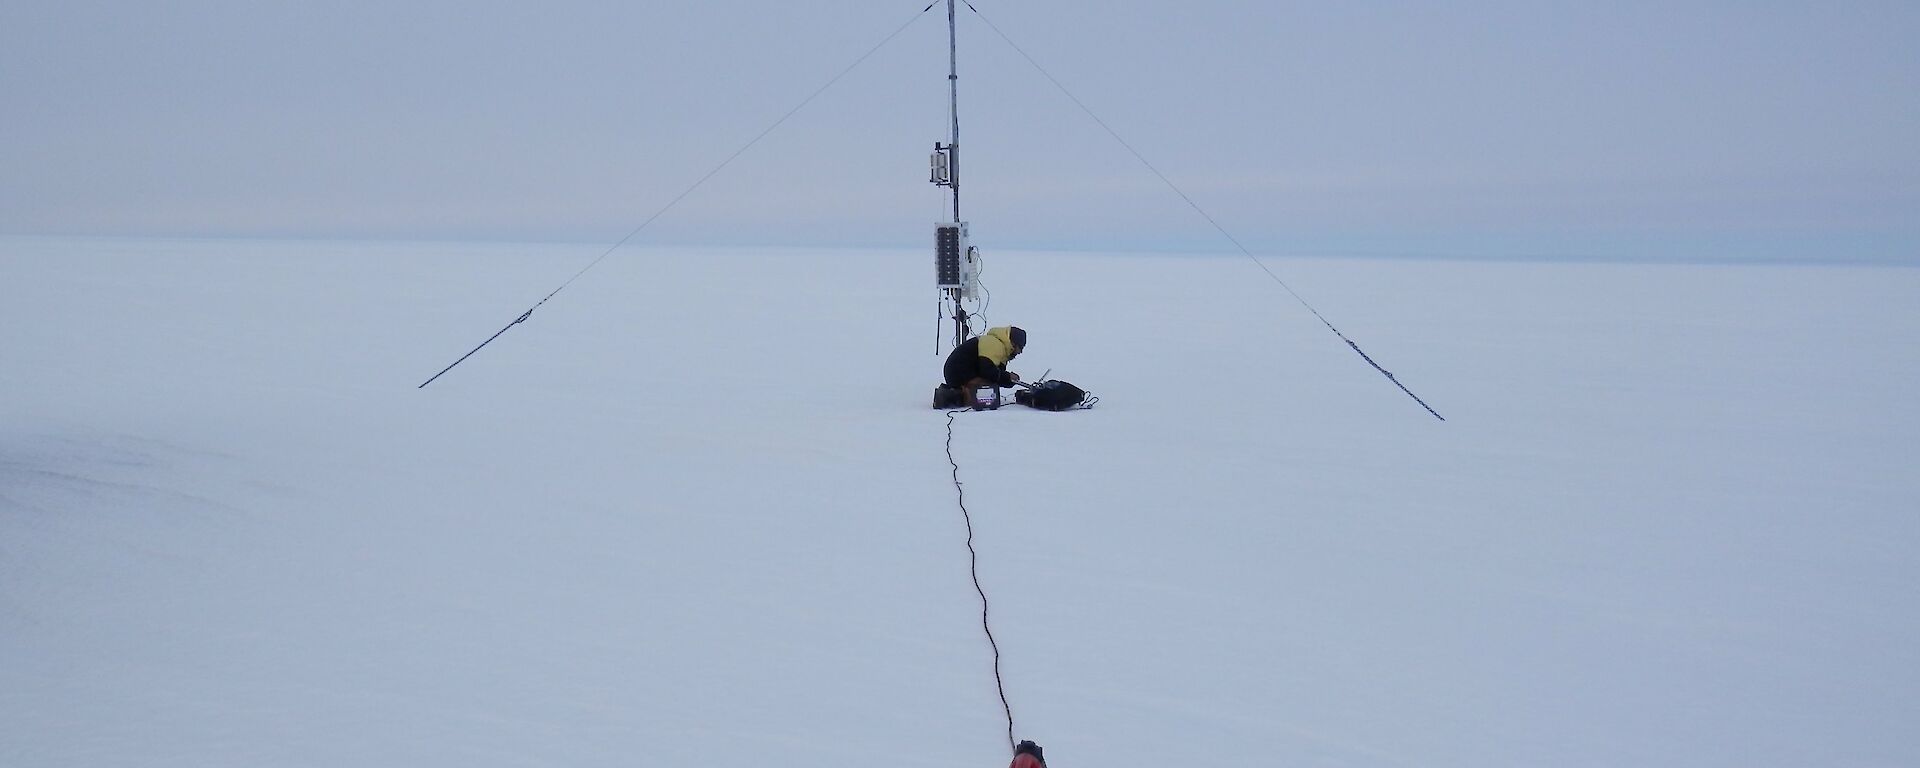 Expeditioner leans over laptop in snow underneath a weather tower (AWS)